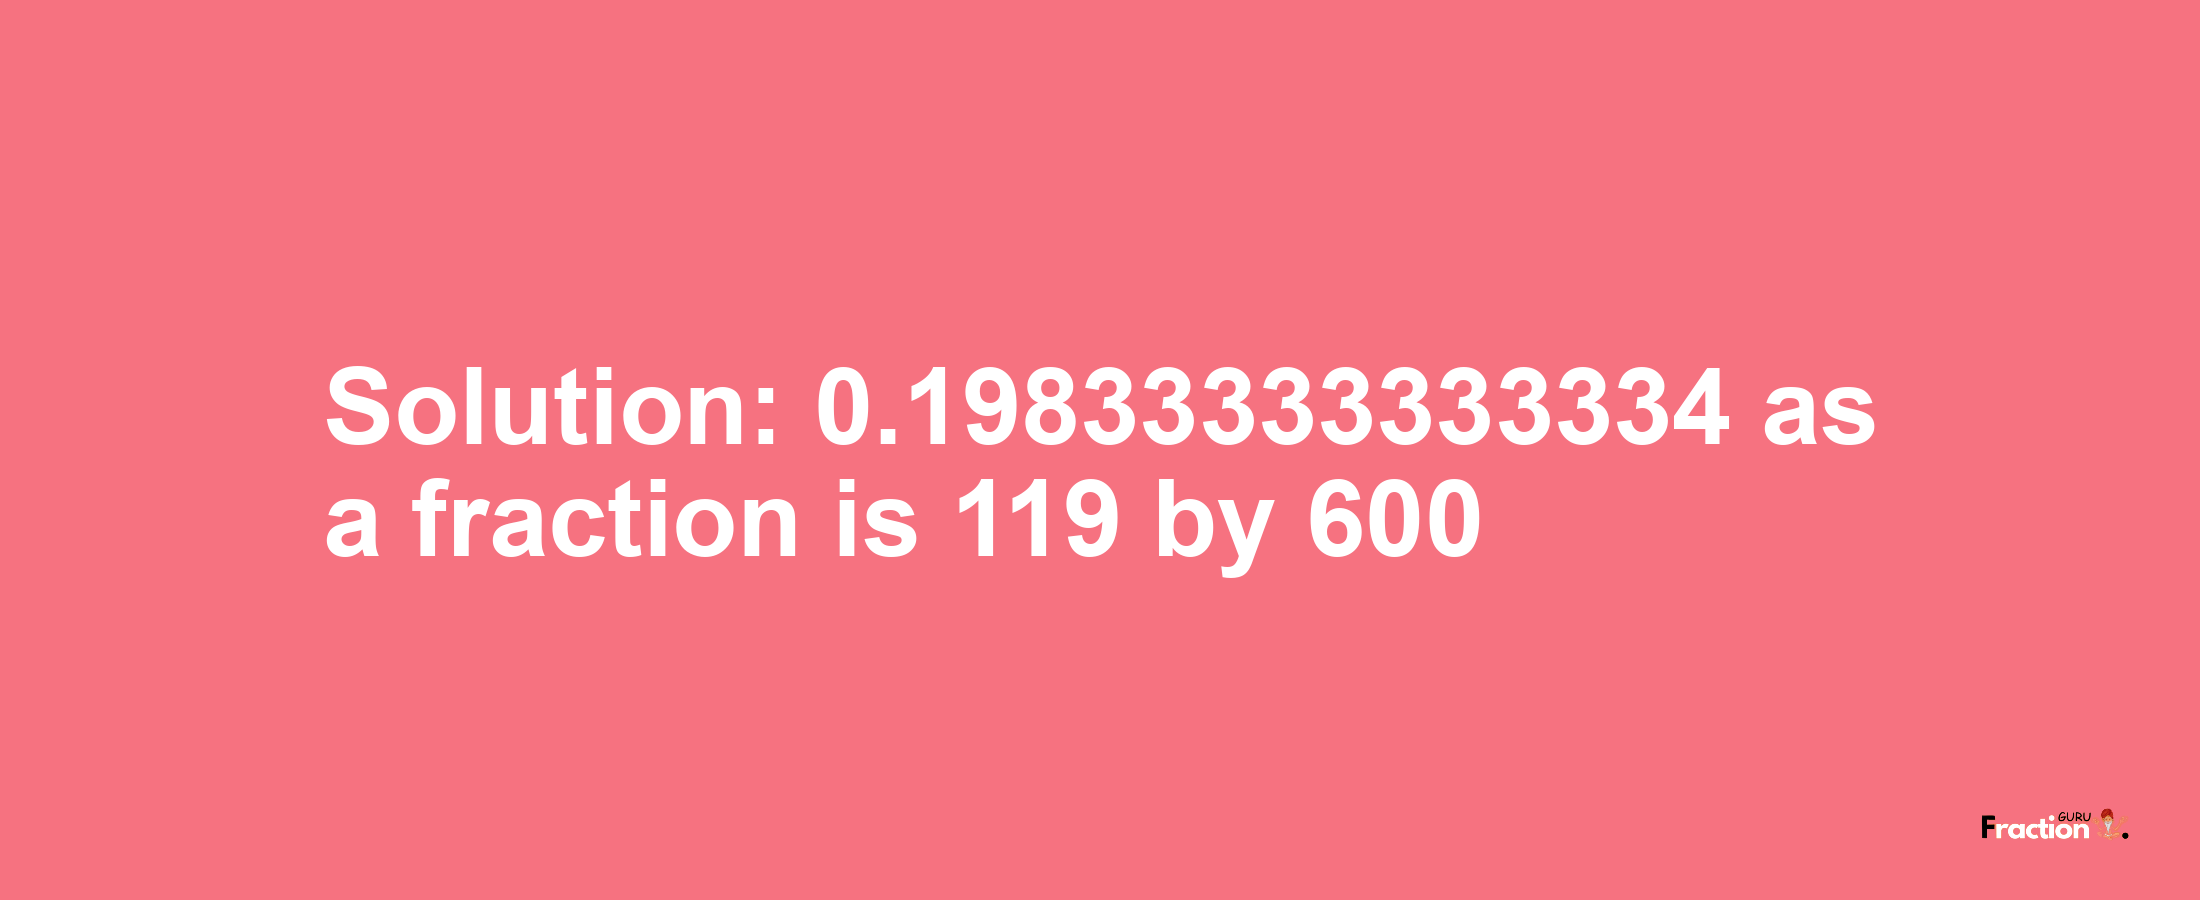 Solution:0.19833333333334 as a fraction is 119/600